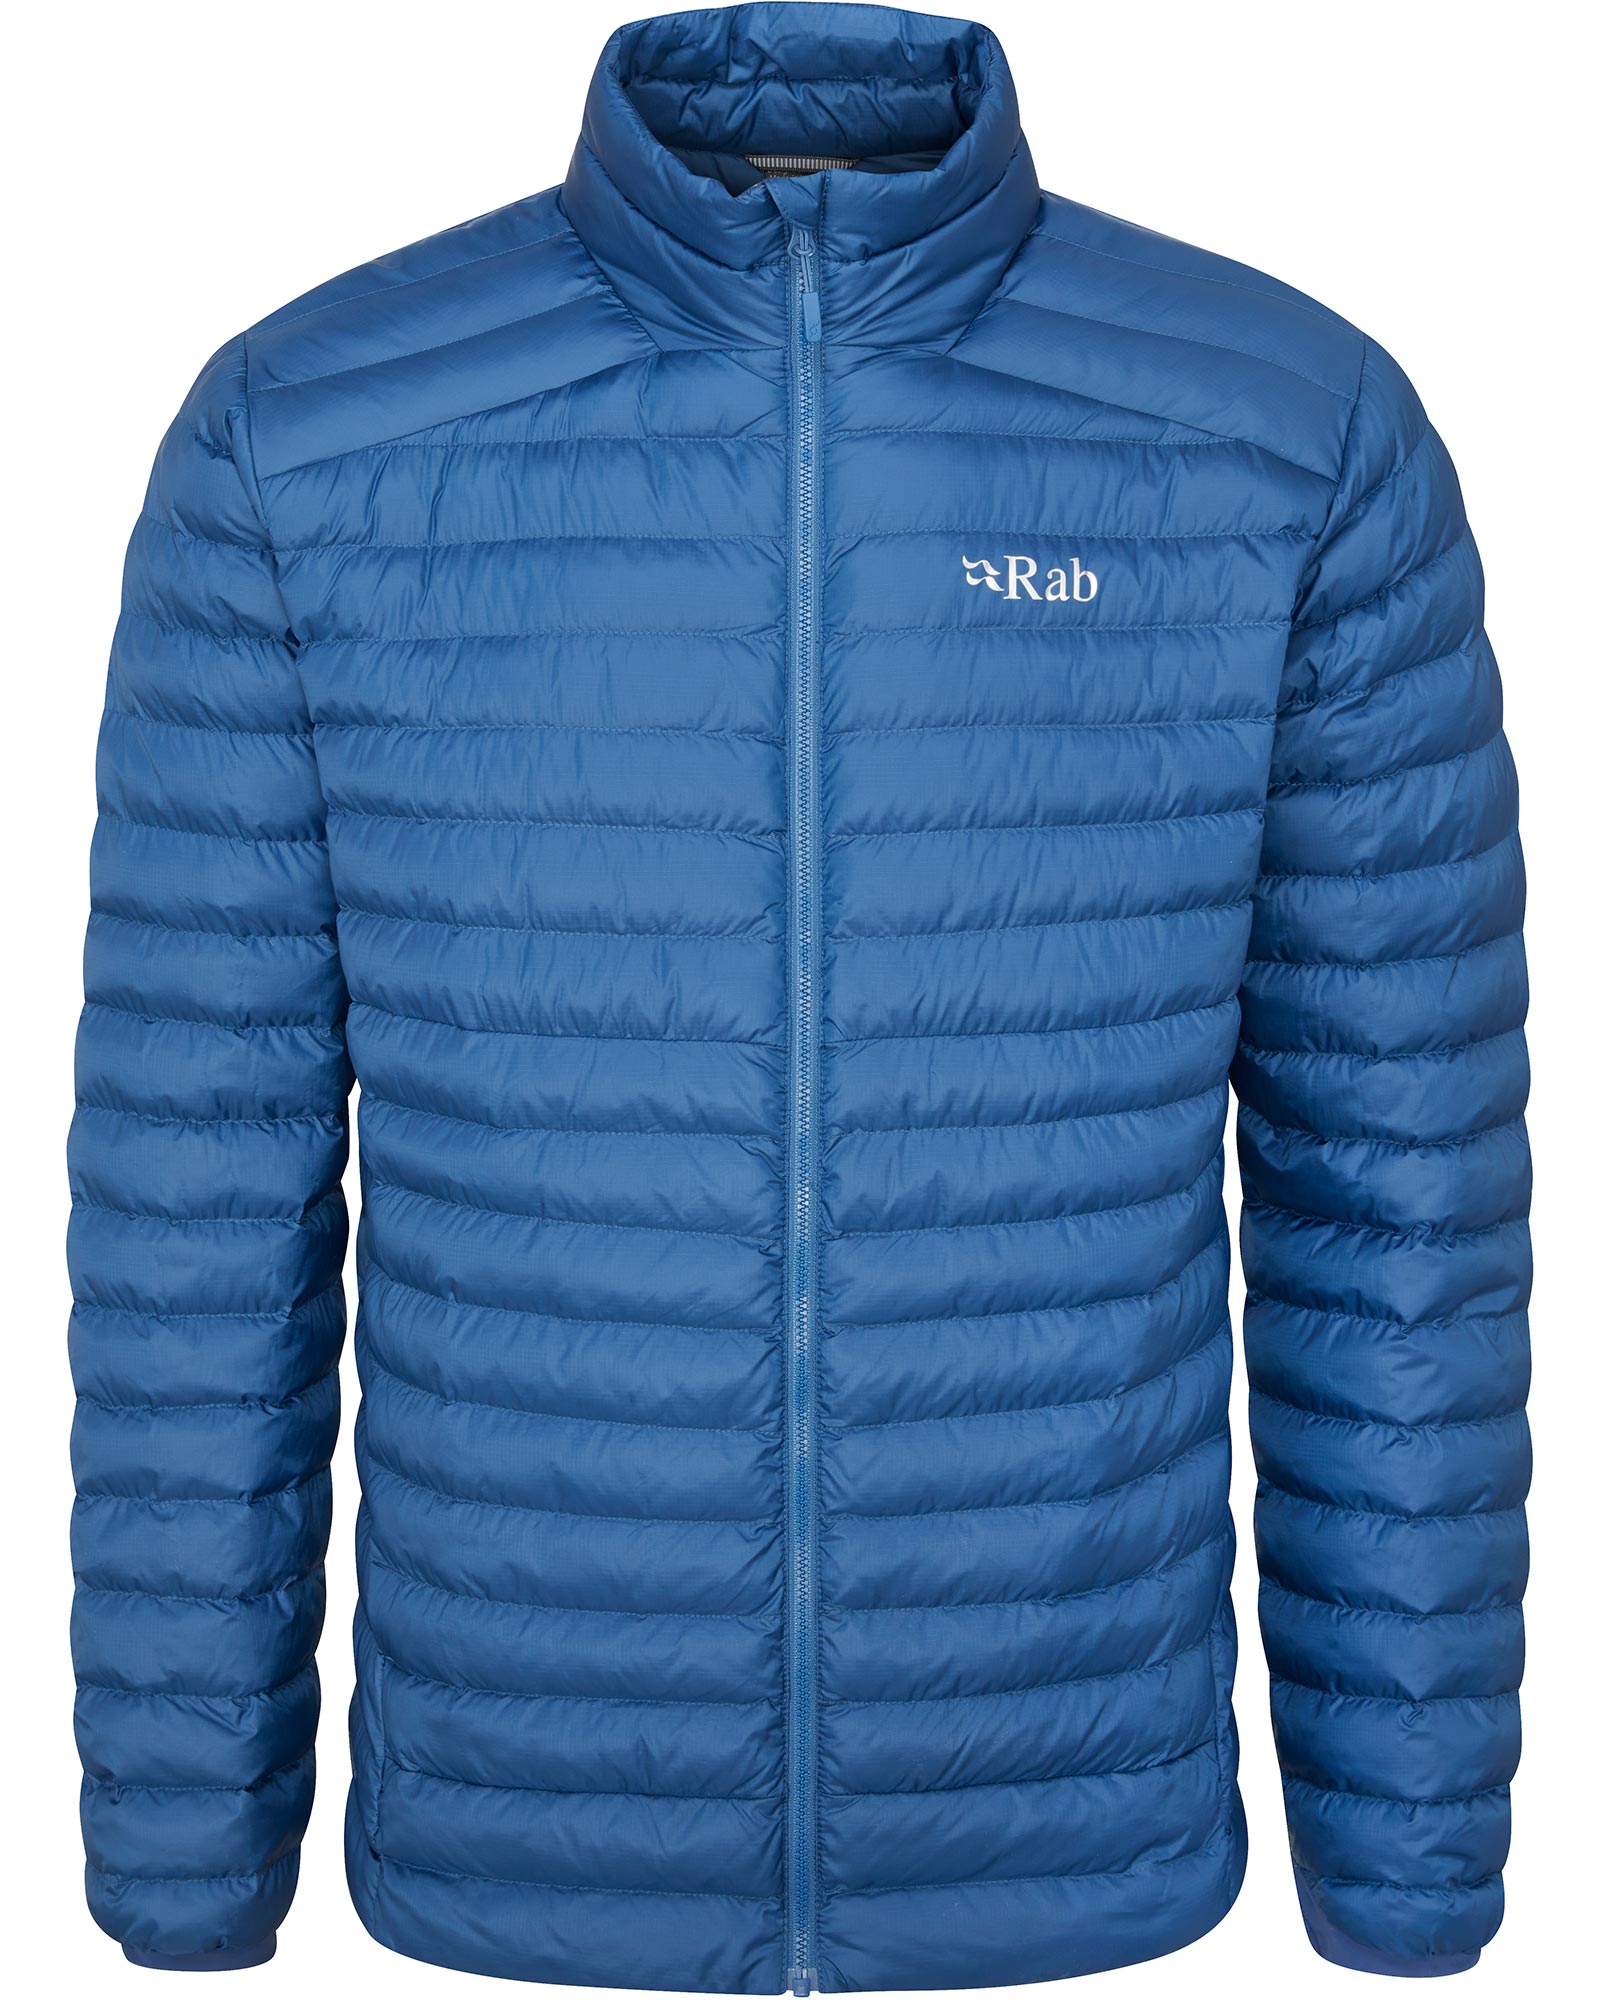 Rab Cirrus Men’s Insulated Jacket - Ink S